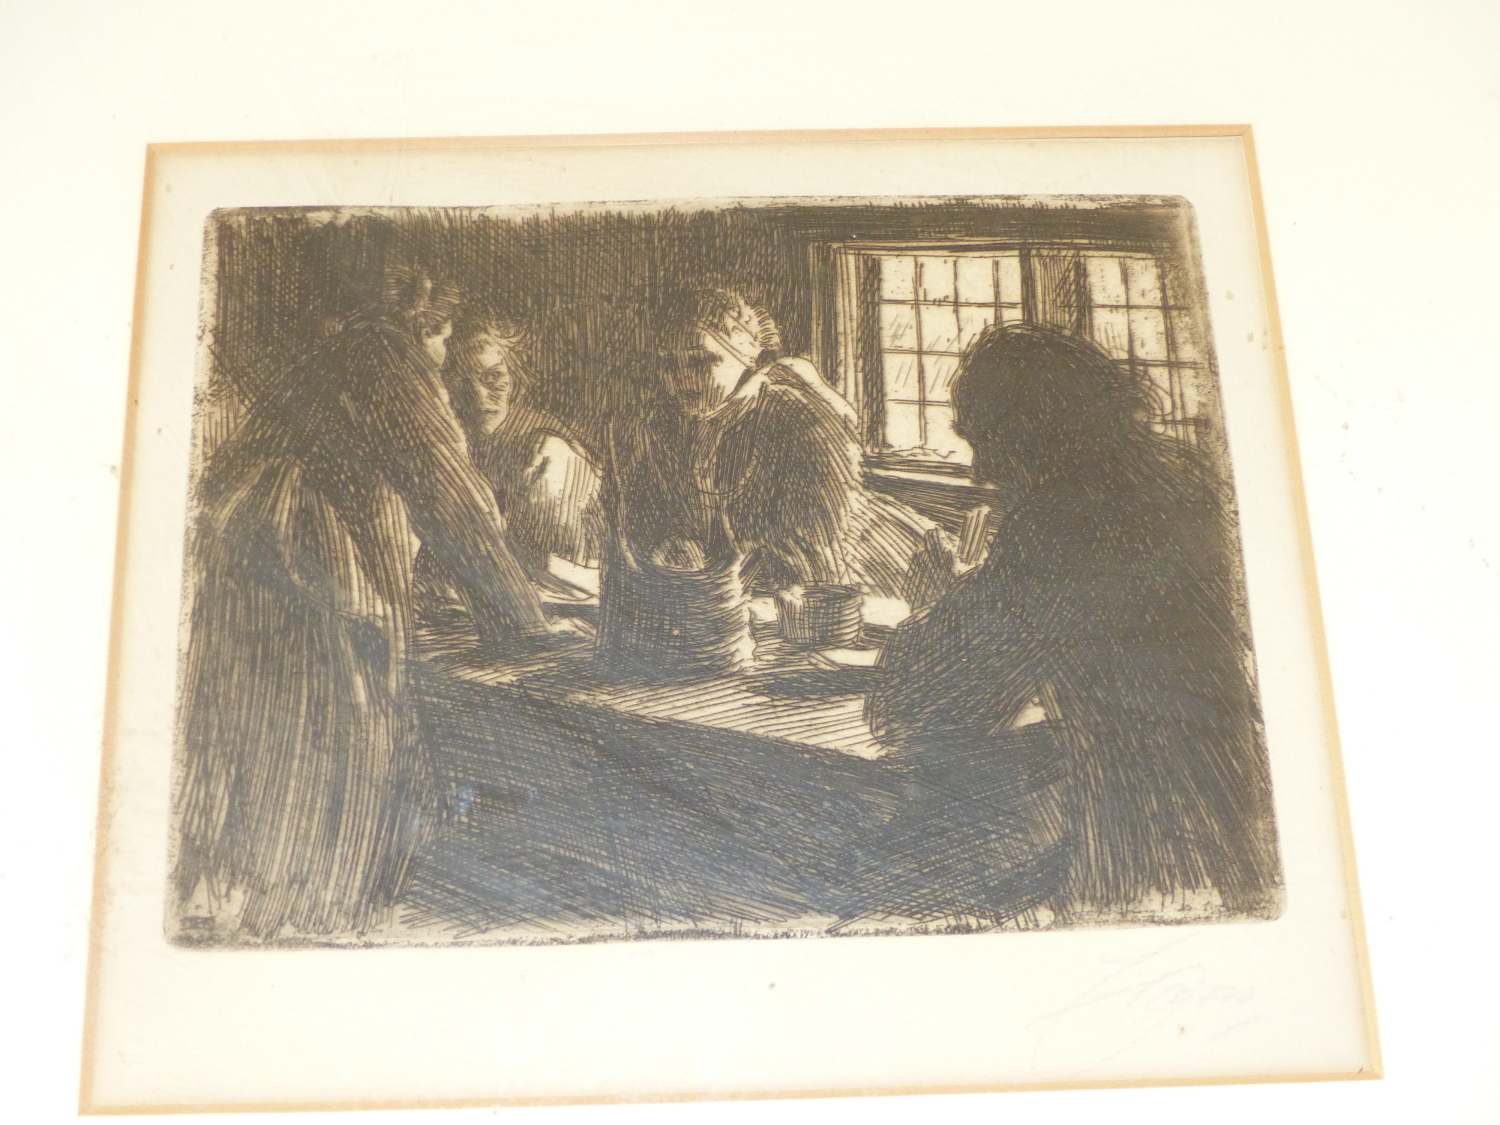 ANDERS ZORN. (1860-1920) AN INTERIOR SCENE, PENCIL SIGNED ETCHING WITH GALLERY LABEL VERSO. 11.5 x